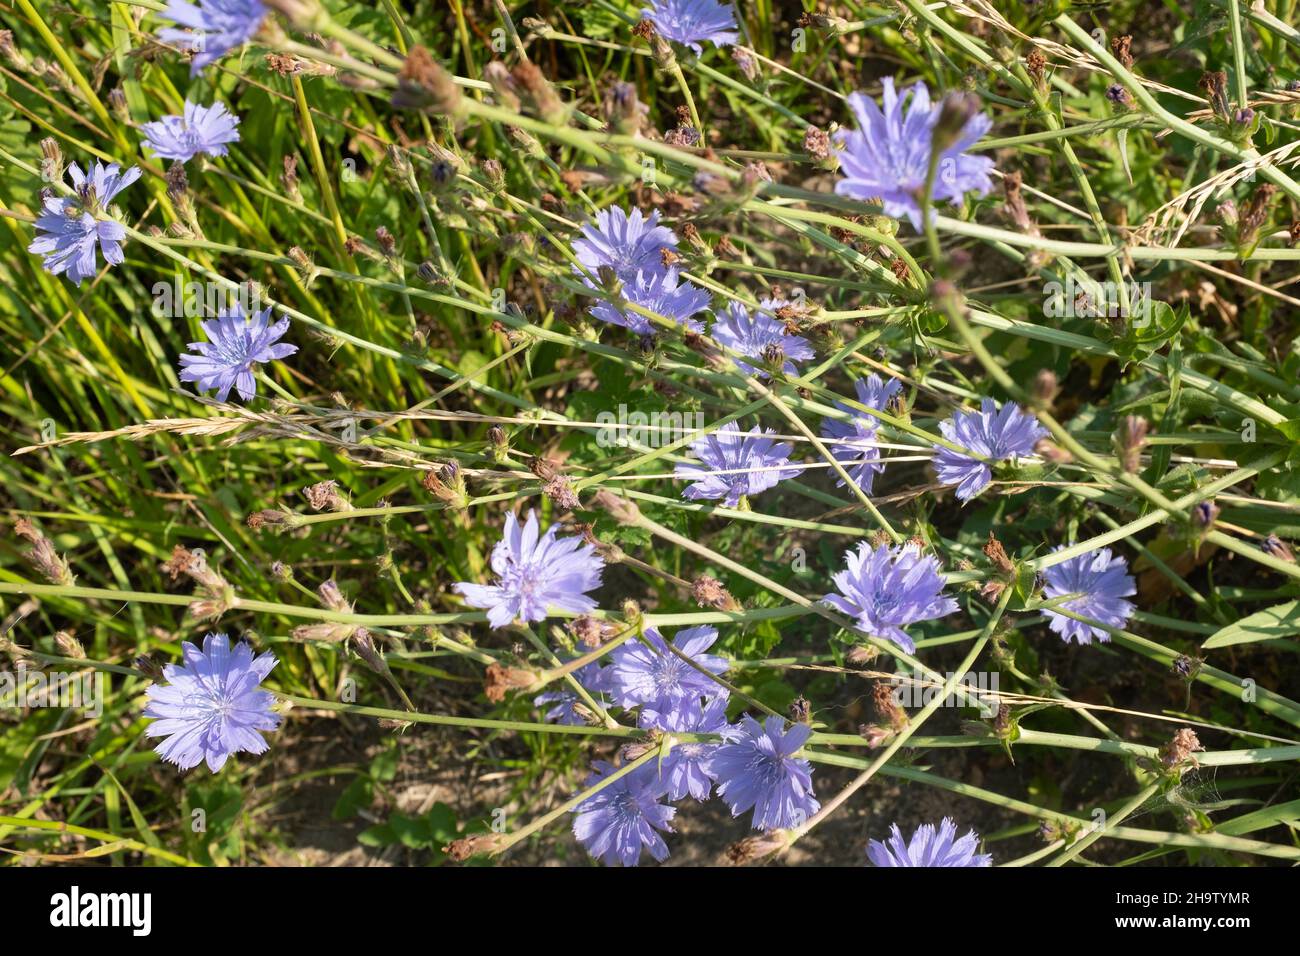 Landscape from Blue flowers of chicory. Plants with the Latin name Cichorium intybus. Chicory blooms in the summer meadow. High quality photo Stock Photo